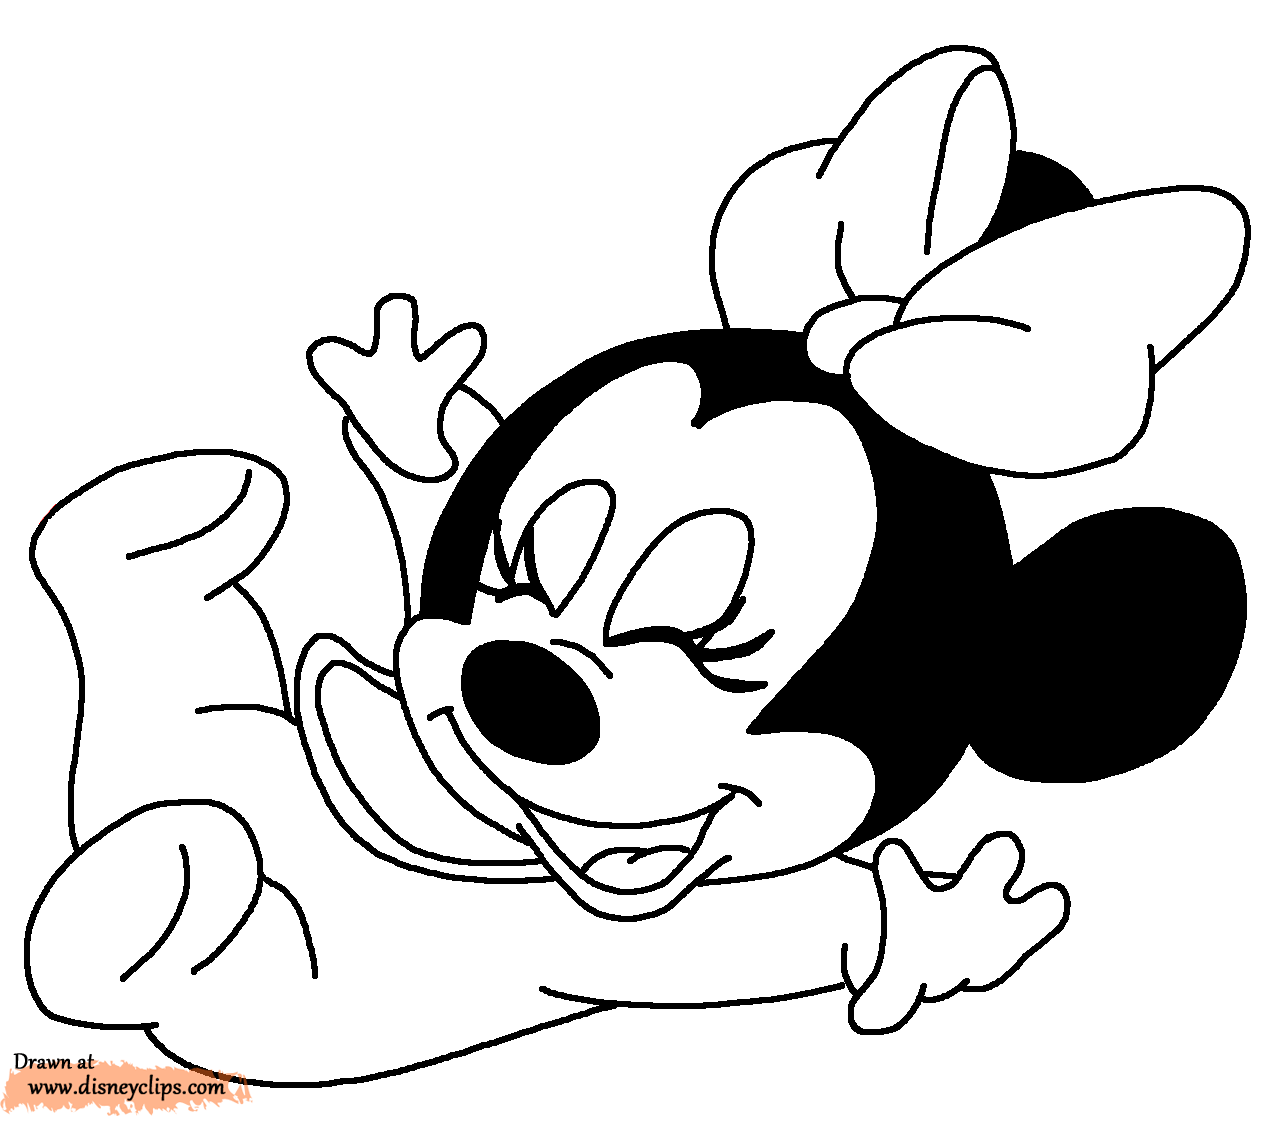 coloring pages baby cute disney coloring pages to download and print for free baby coloring pages 